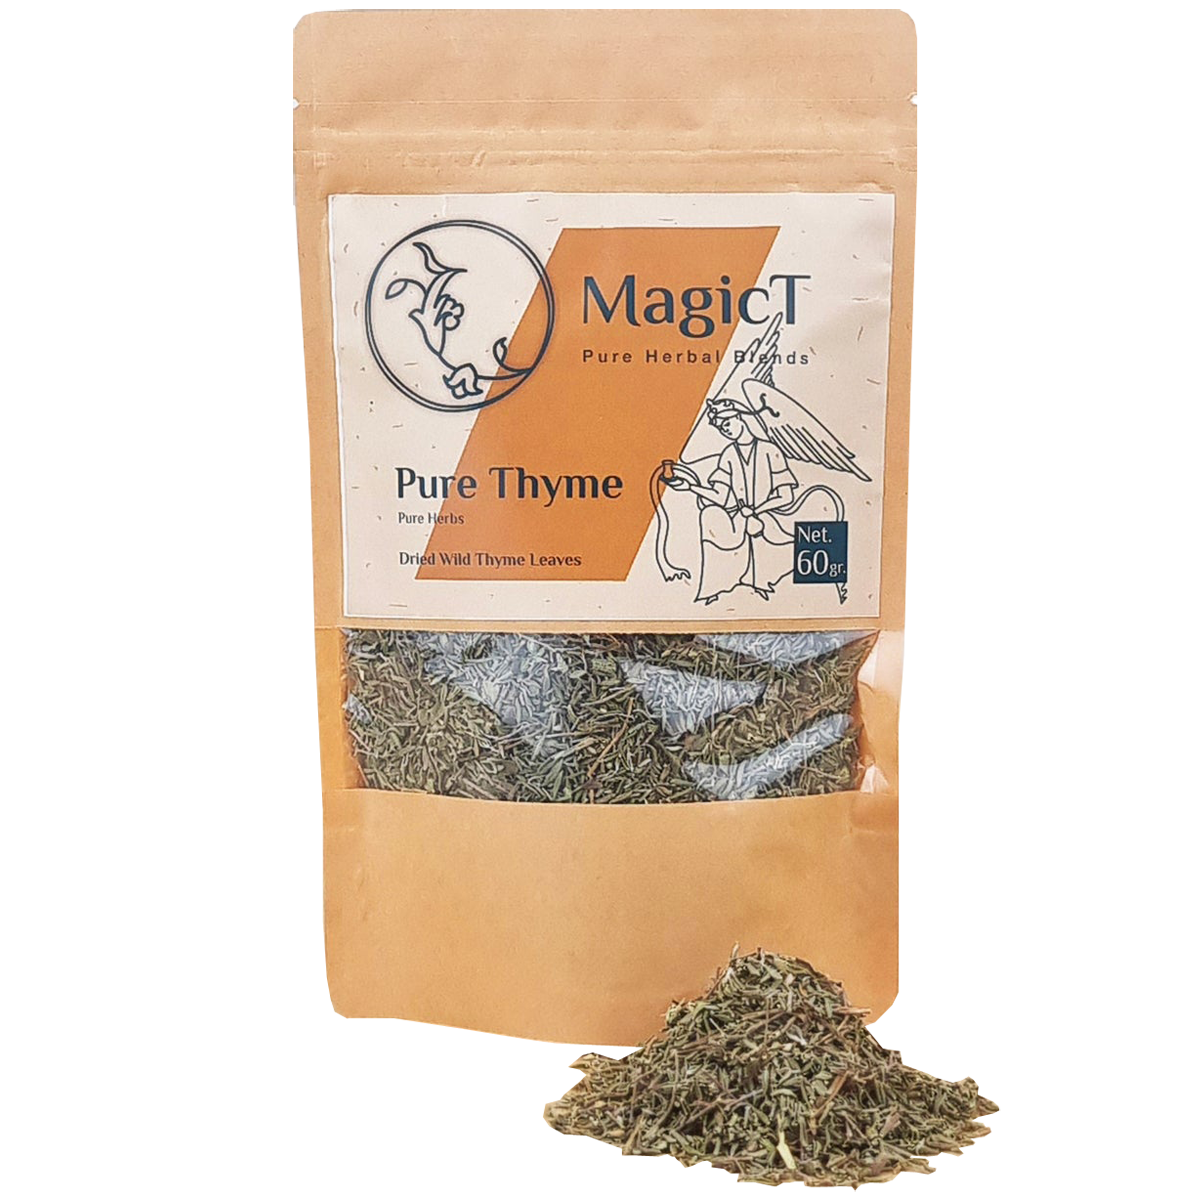 MagicT Pure Thyme - Pure Herbs 